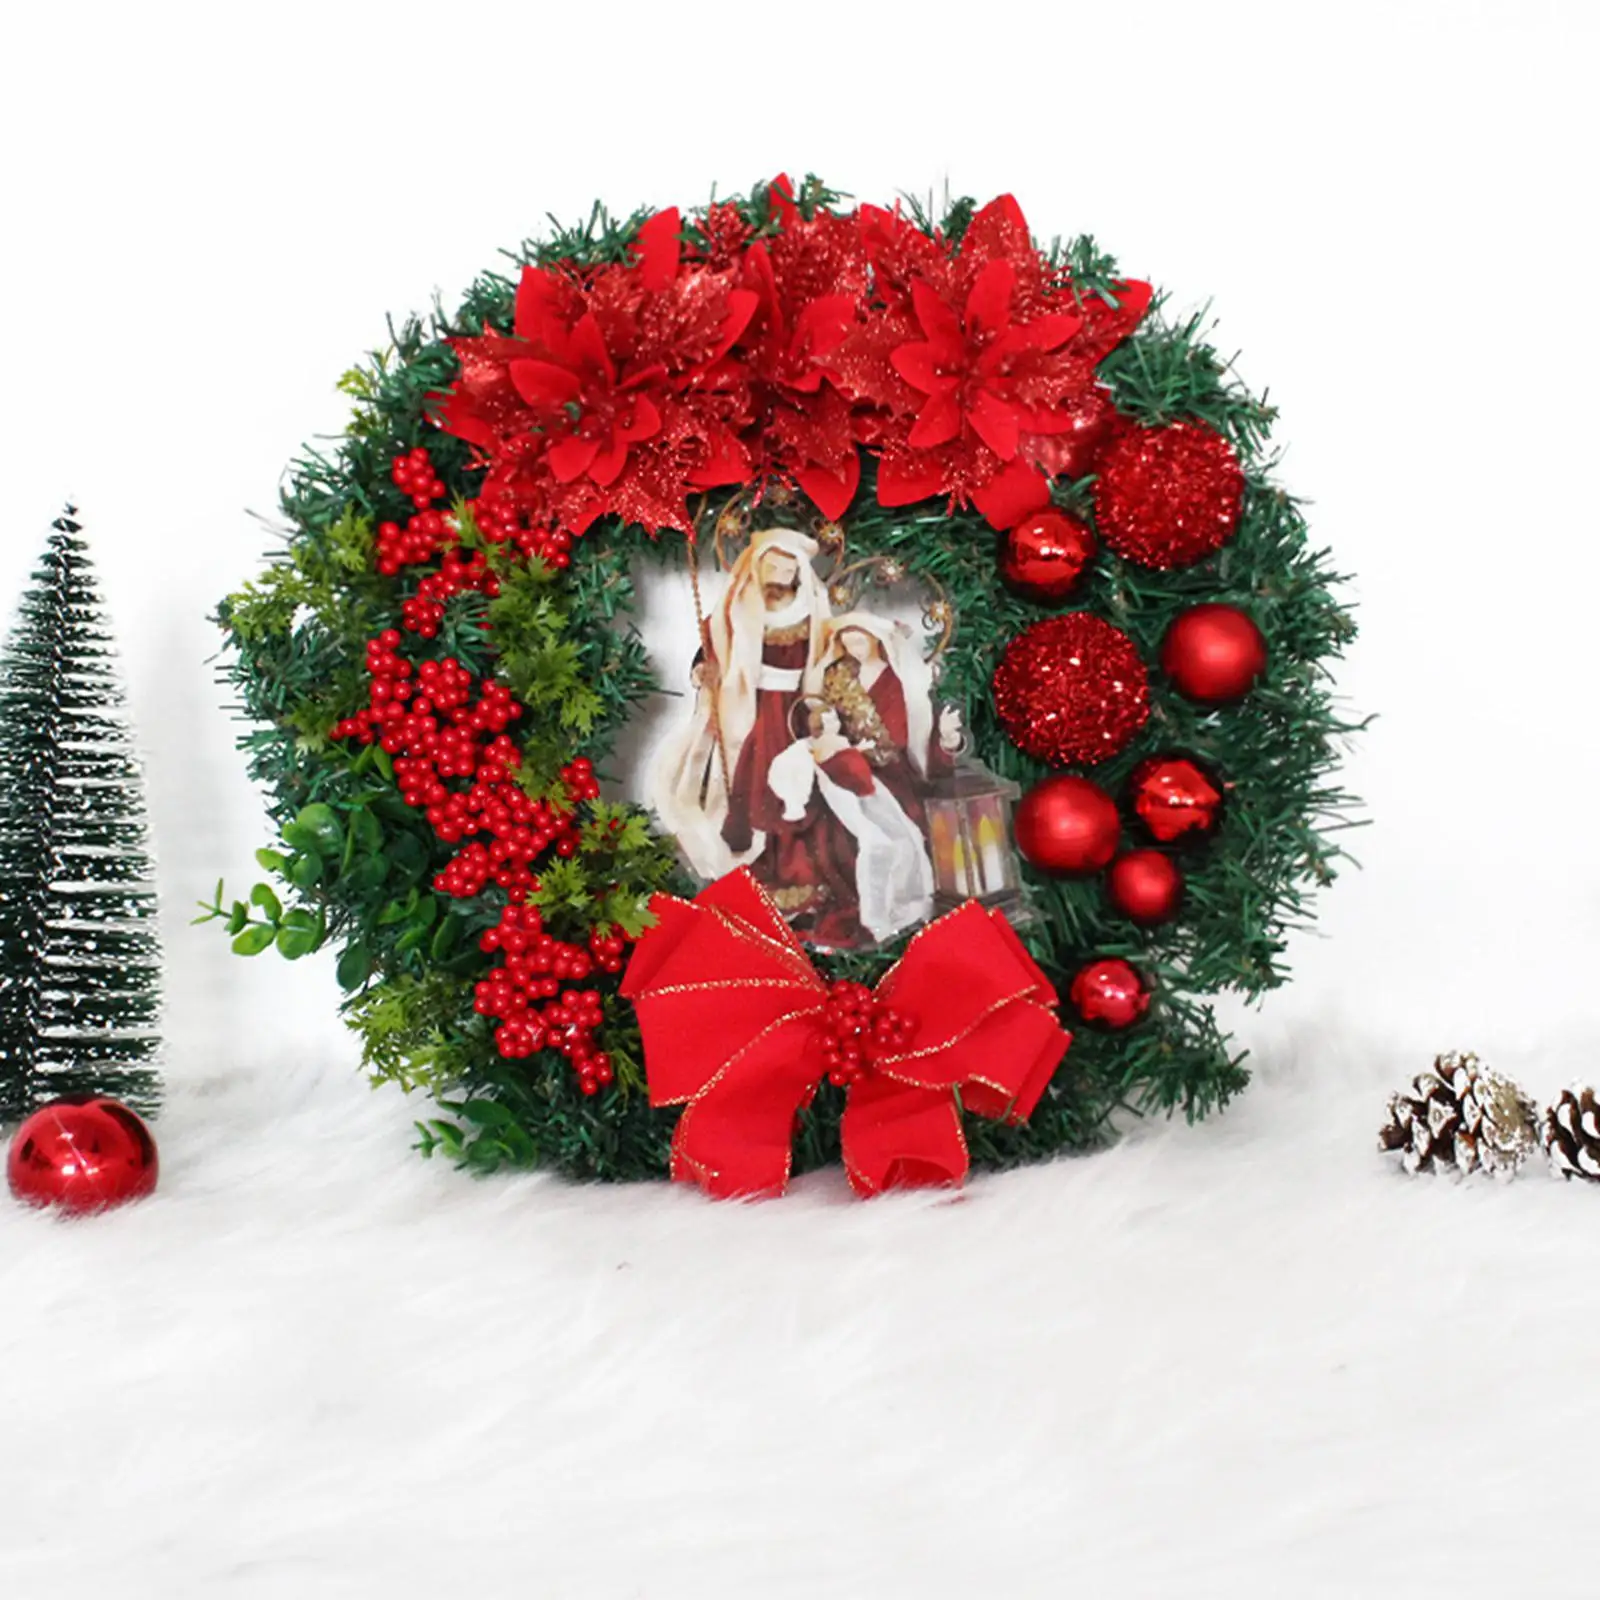 Artificial Christmas Wreaths Door Wreath Winter Wreath Holiday Wreath Hanging Wreath for Home Party Outdoor Wall Ornament